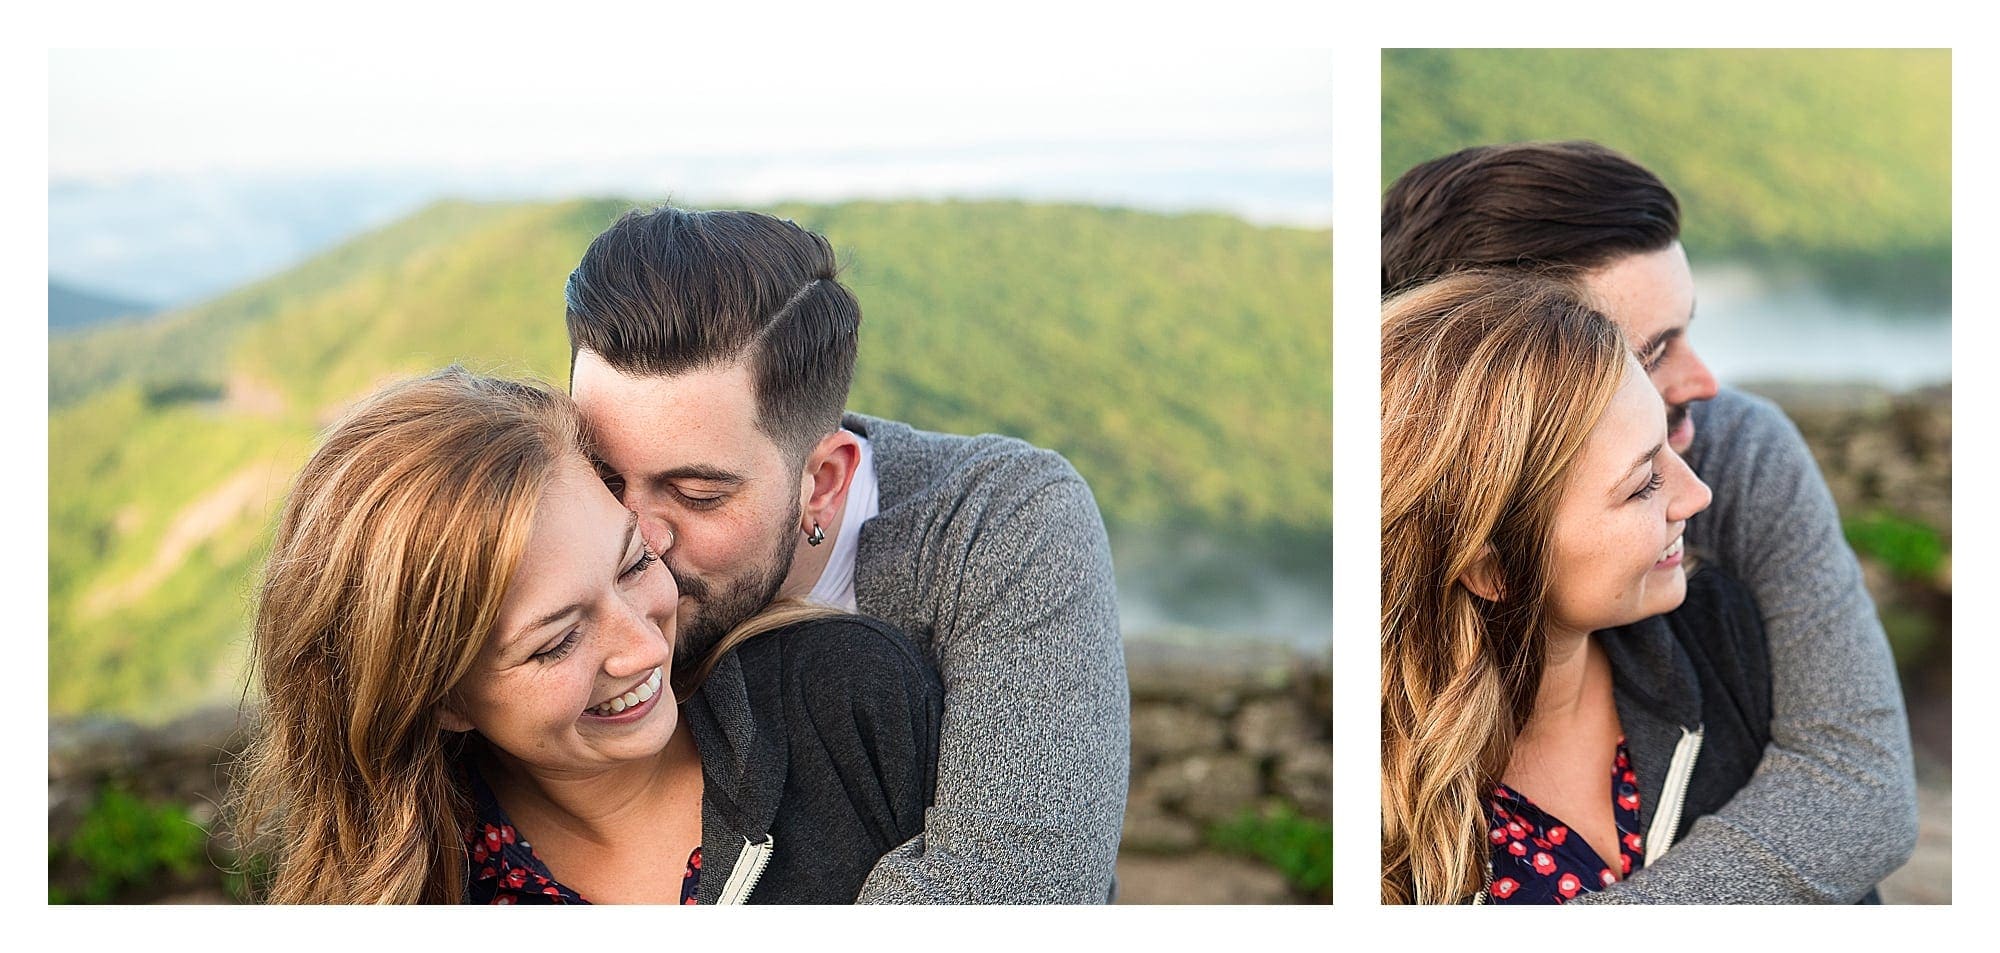 Man hugging fiance and kissing her on cheek